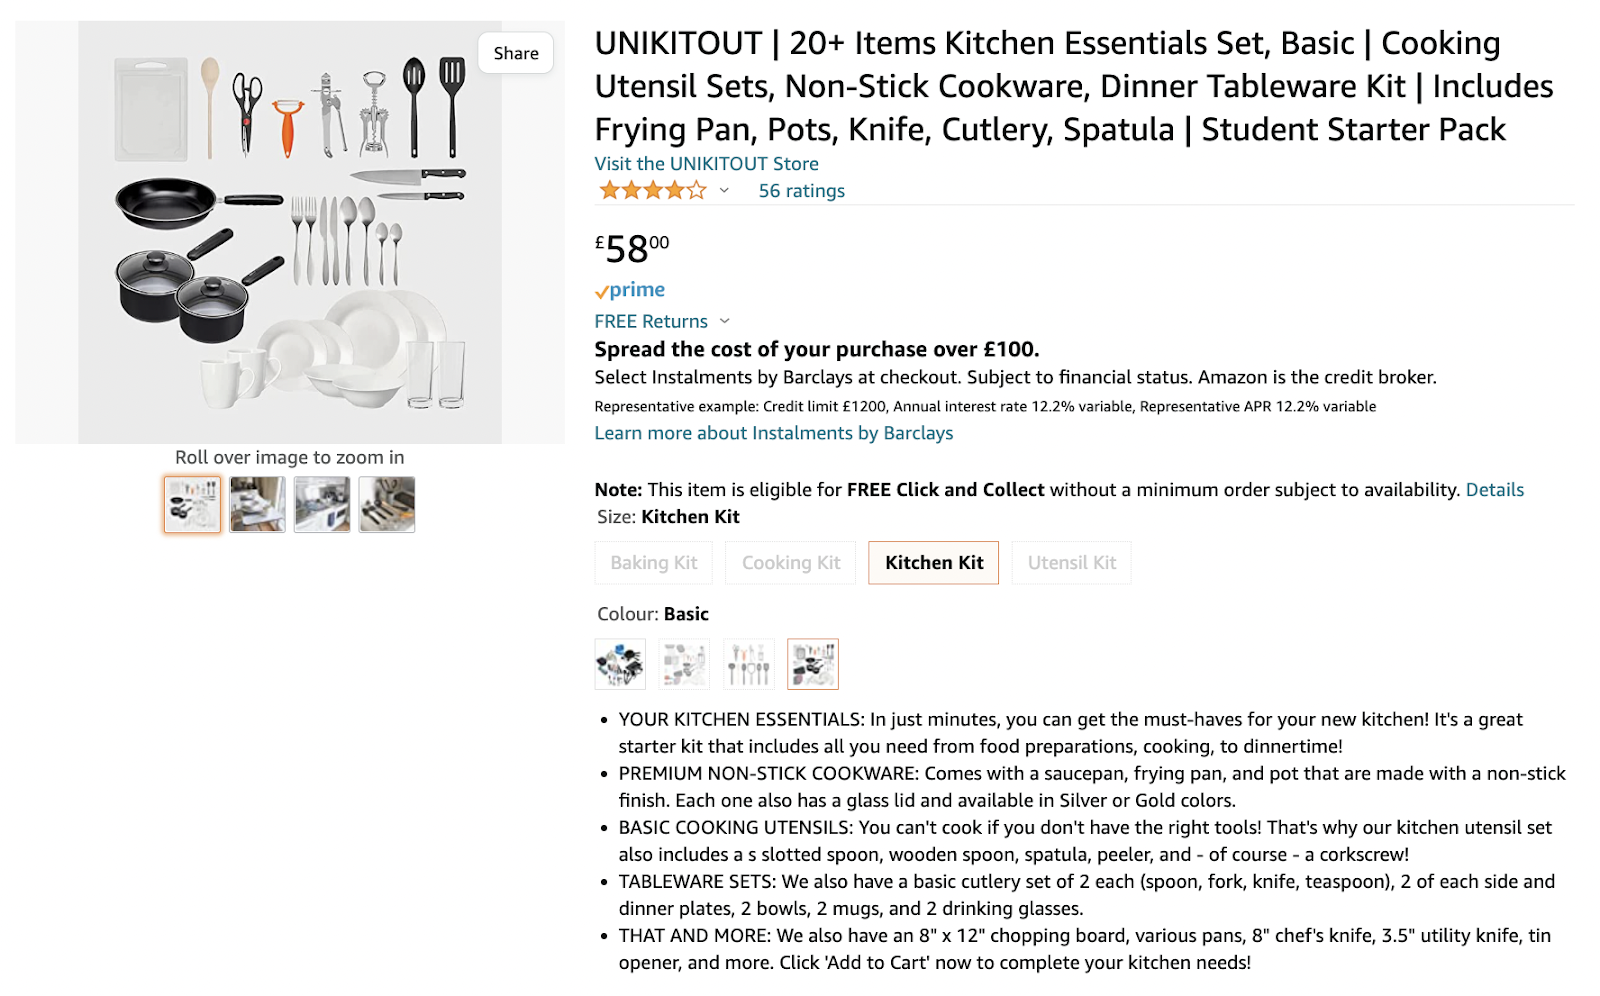 unikitout screenshot product page examples from amazon showing bullet points